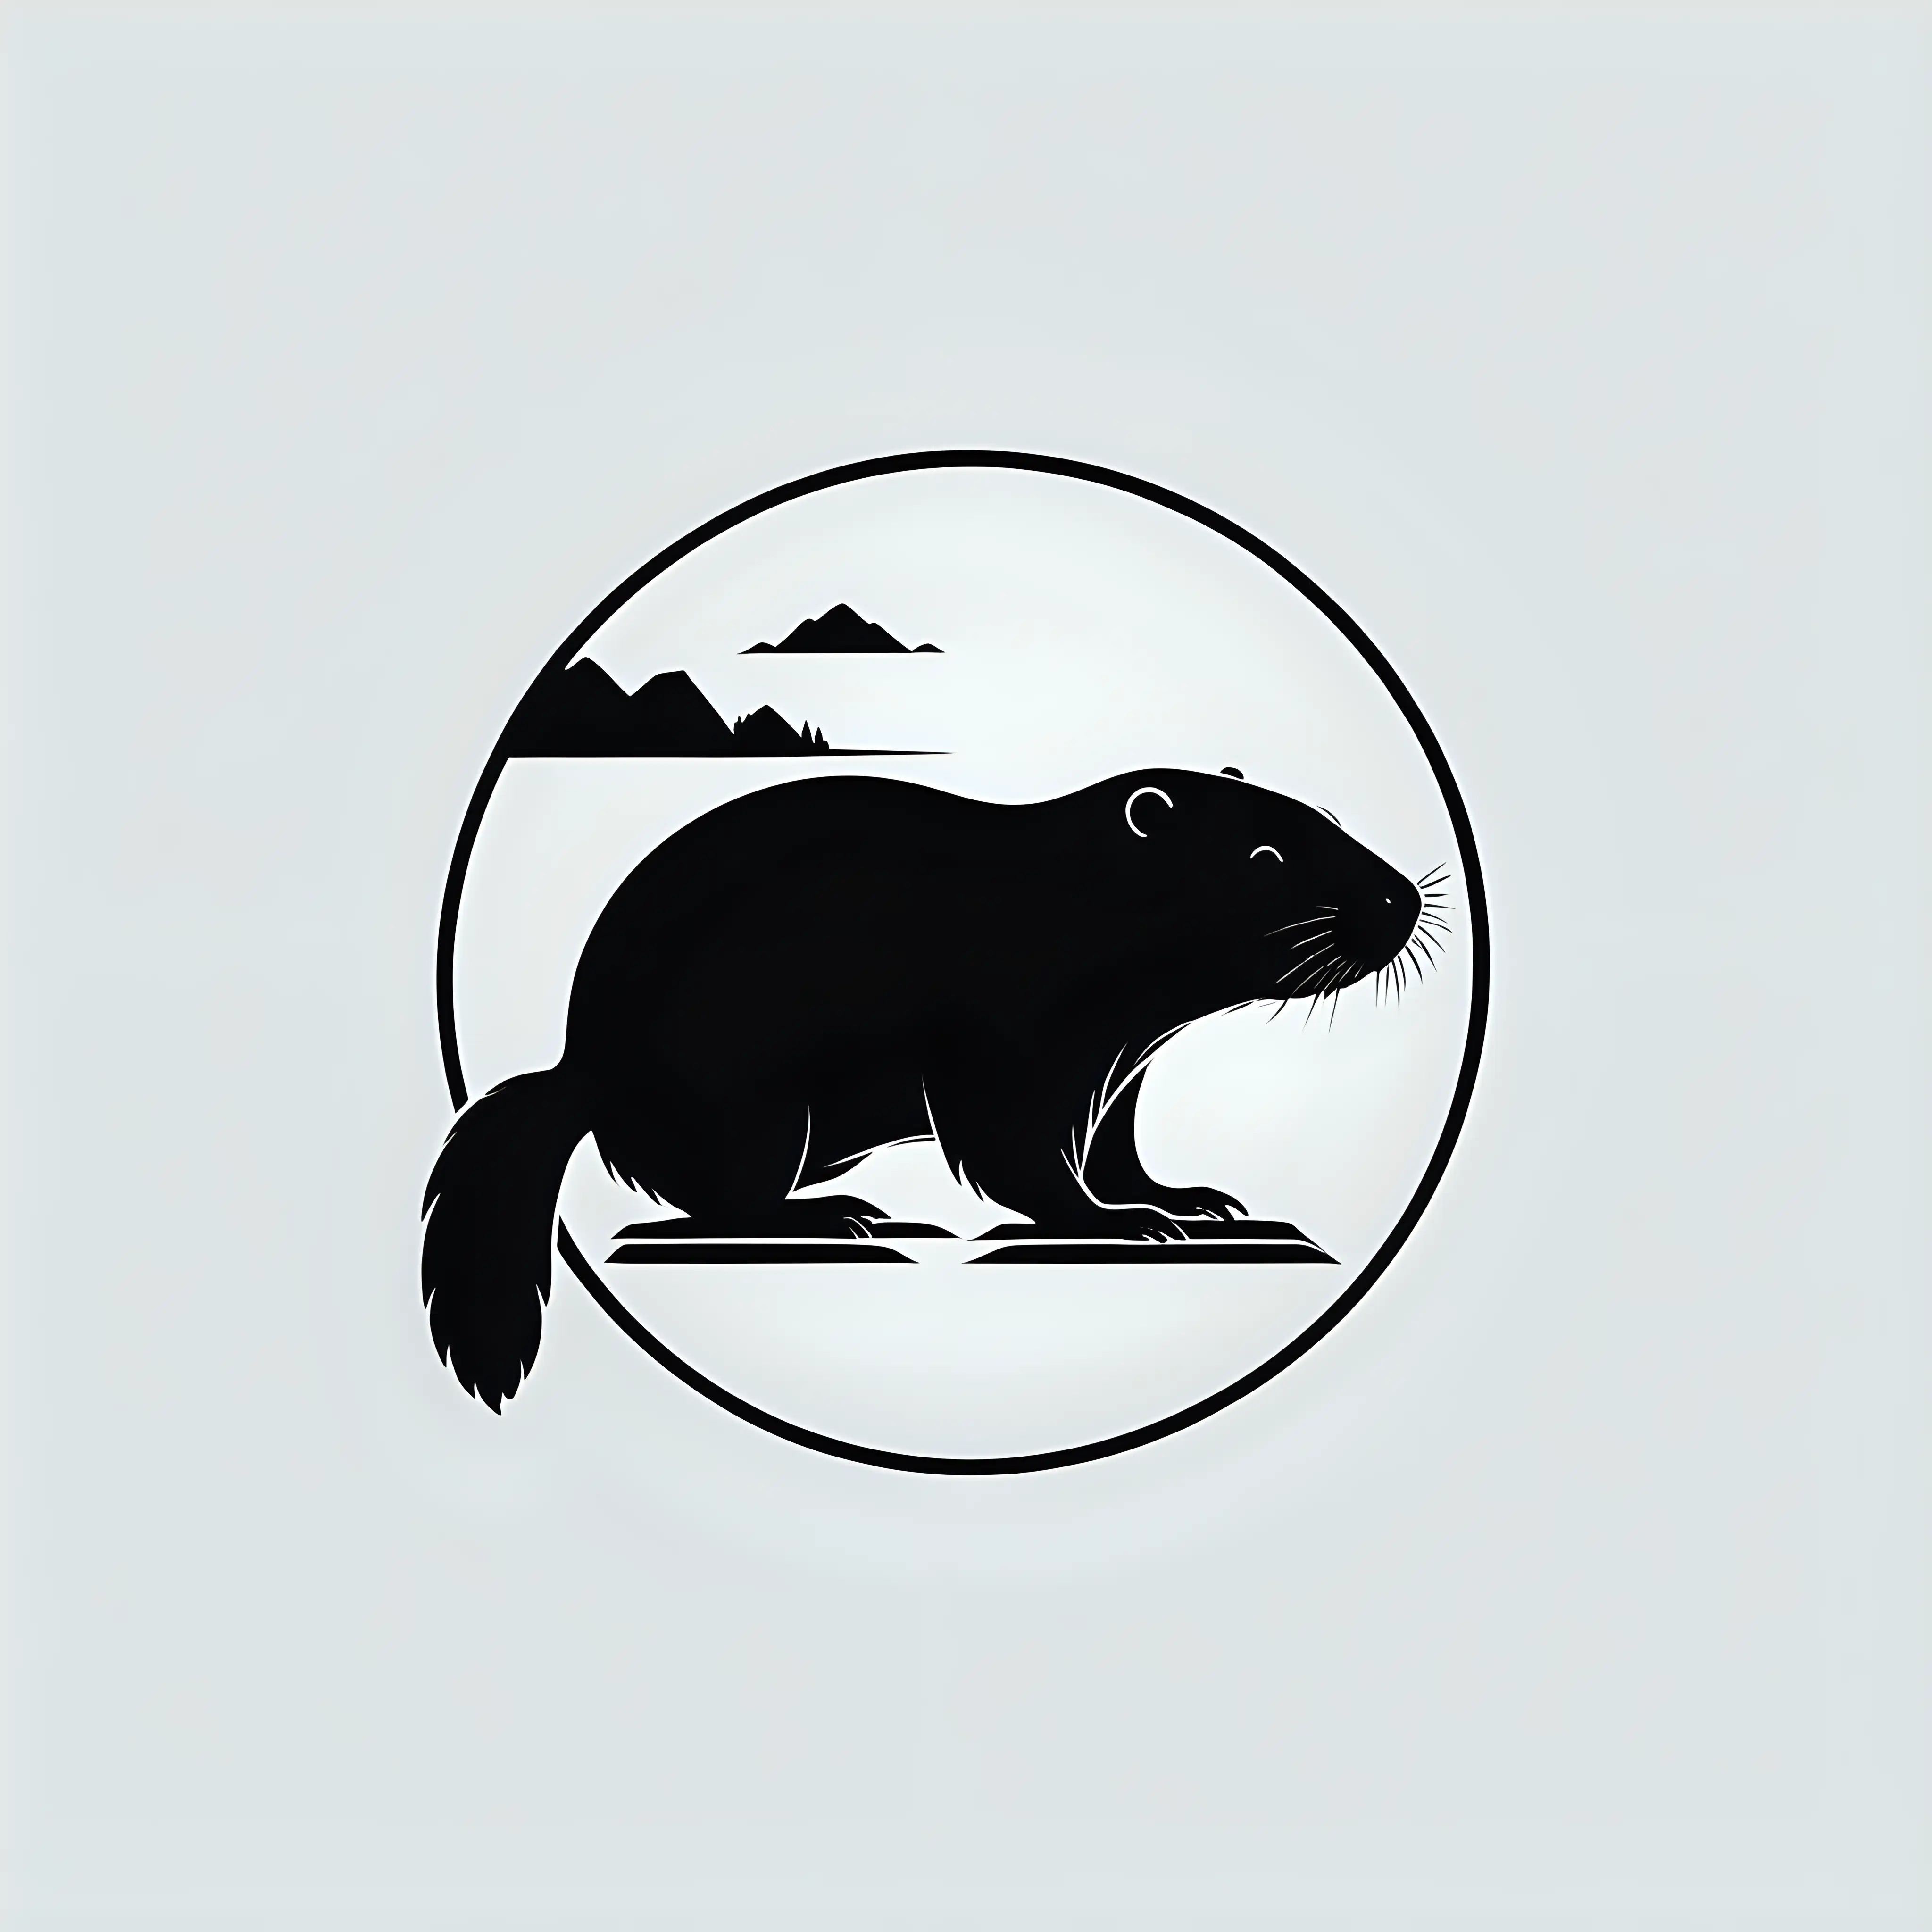 minimalistic logo of a solid black silhouette of a North American beaver on a solid white background